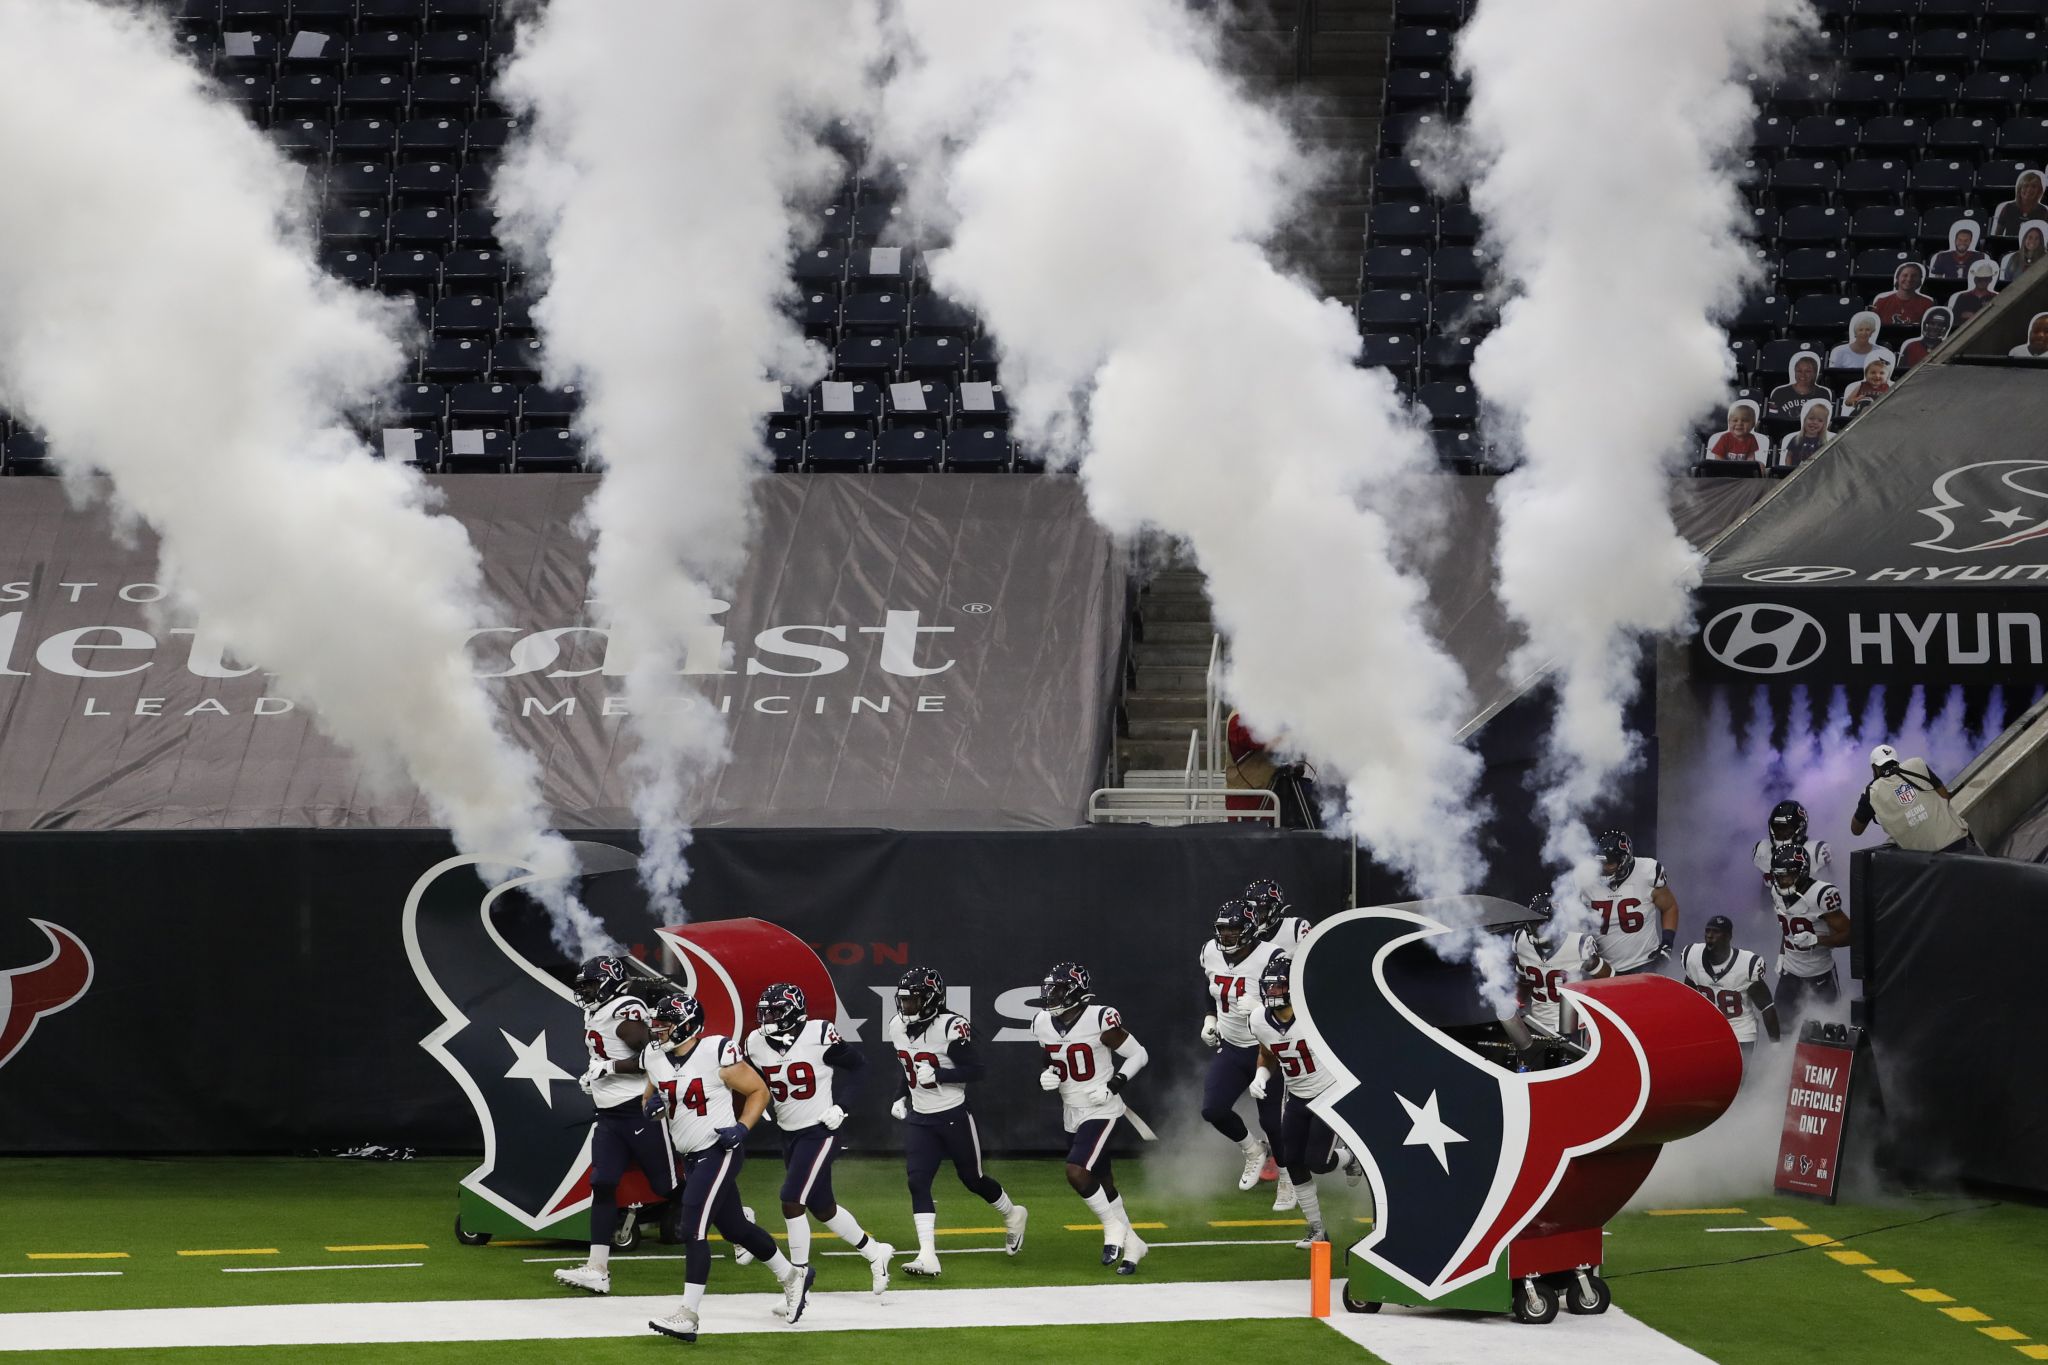 On TV/Radio: 2020 season also takes big bite out of Texans' ratings